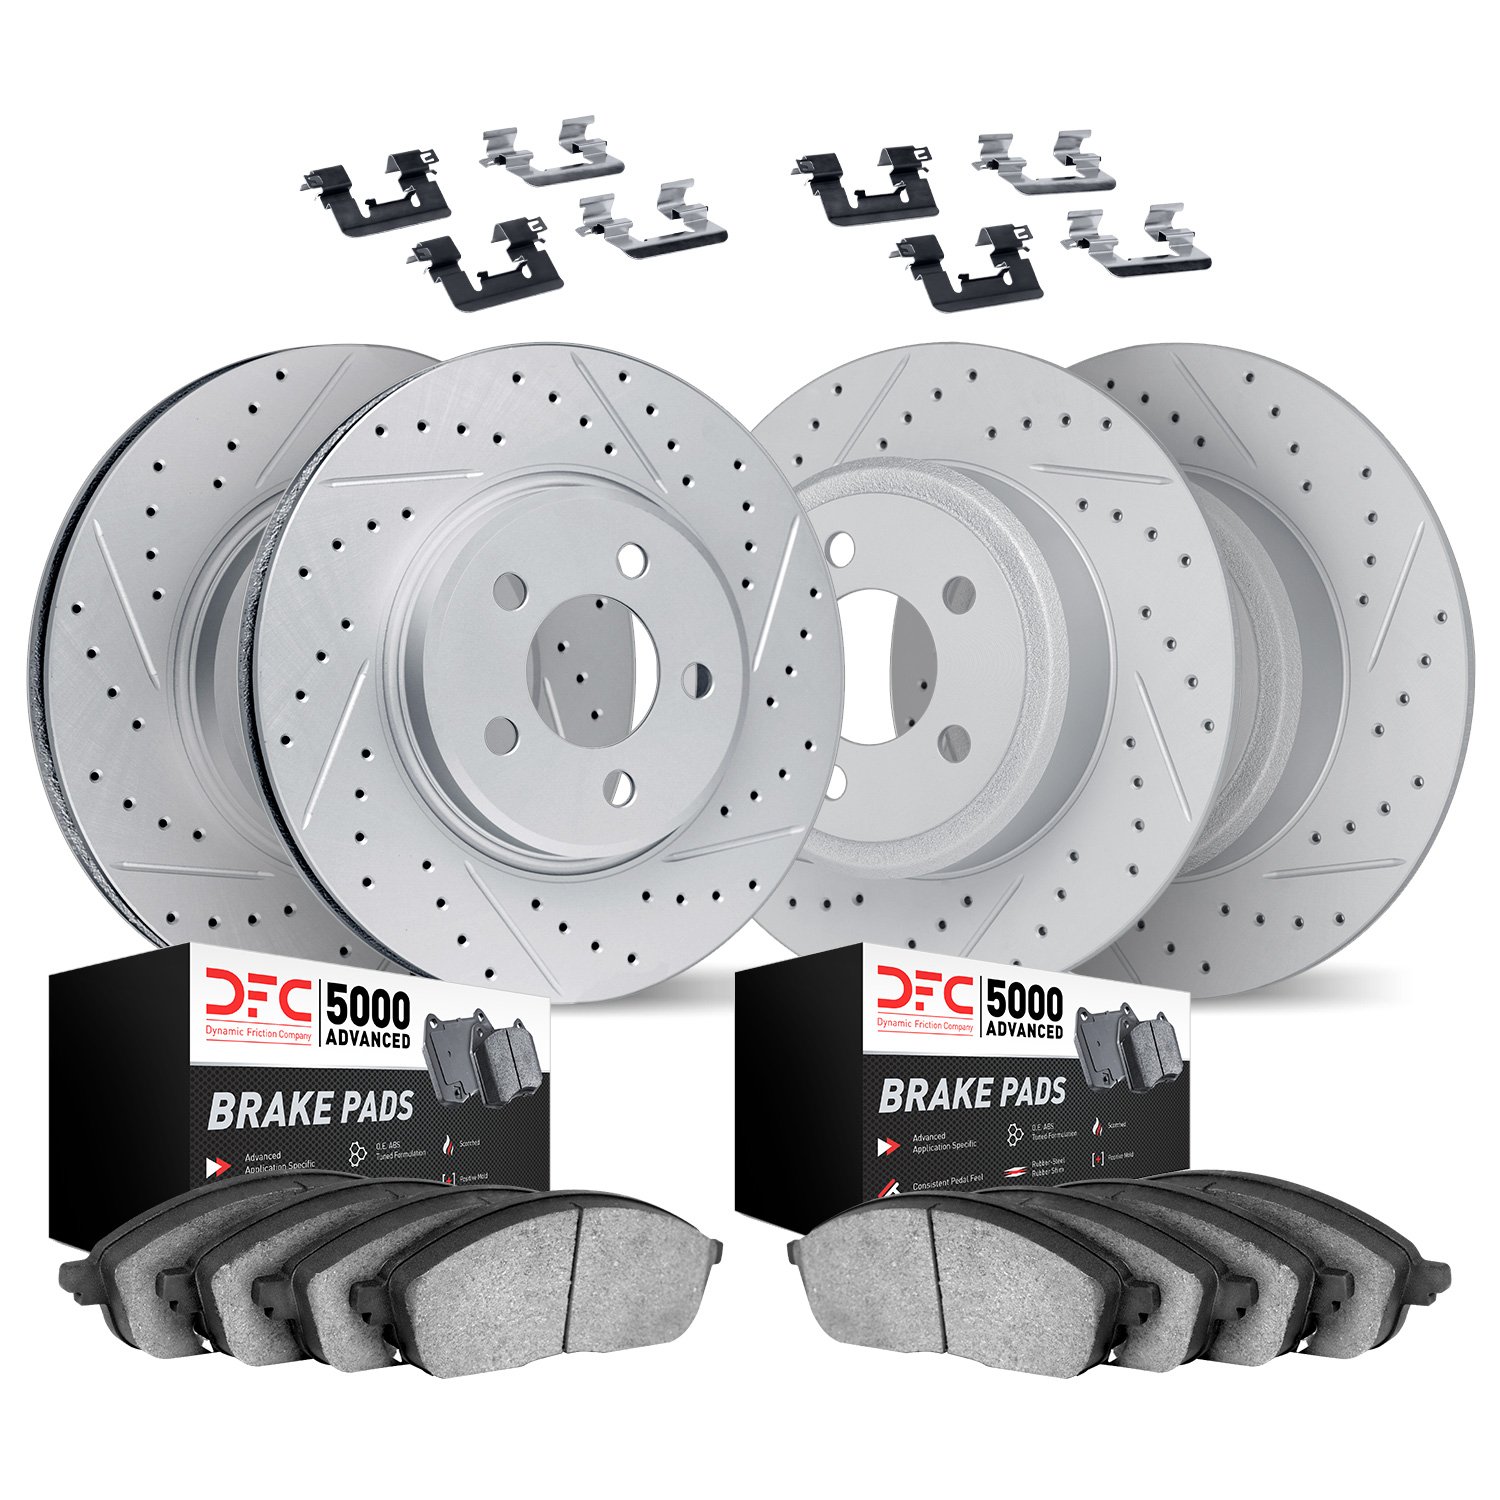 2514-42078 Geoperformance Drilled/Slotted Rotors w/5000 Advanced Brake Pads Kit & Hardware, Fits Select Mopar, Position: Front a